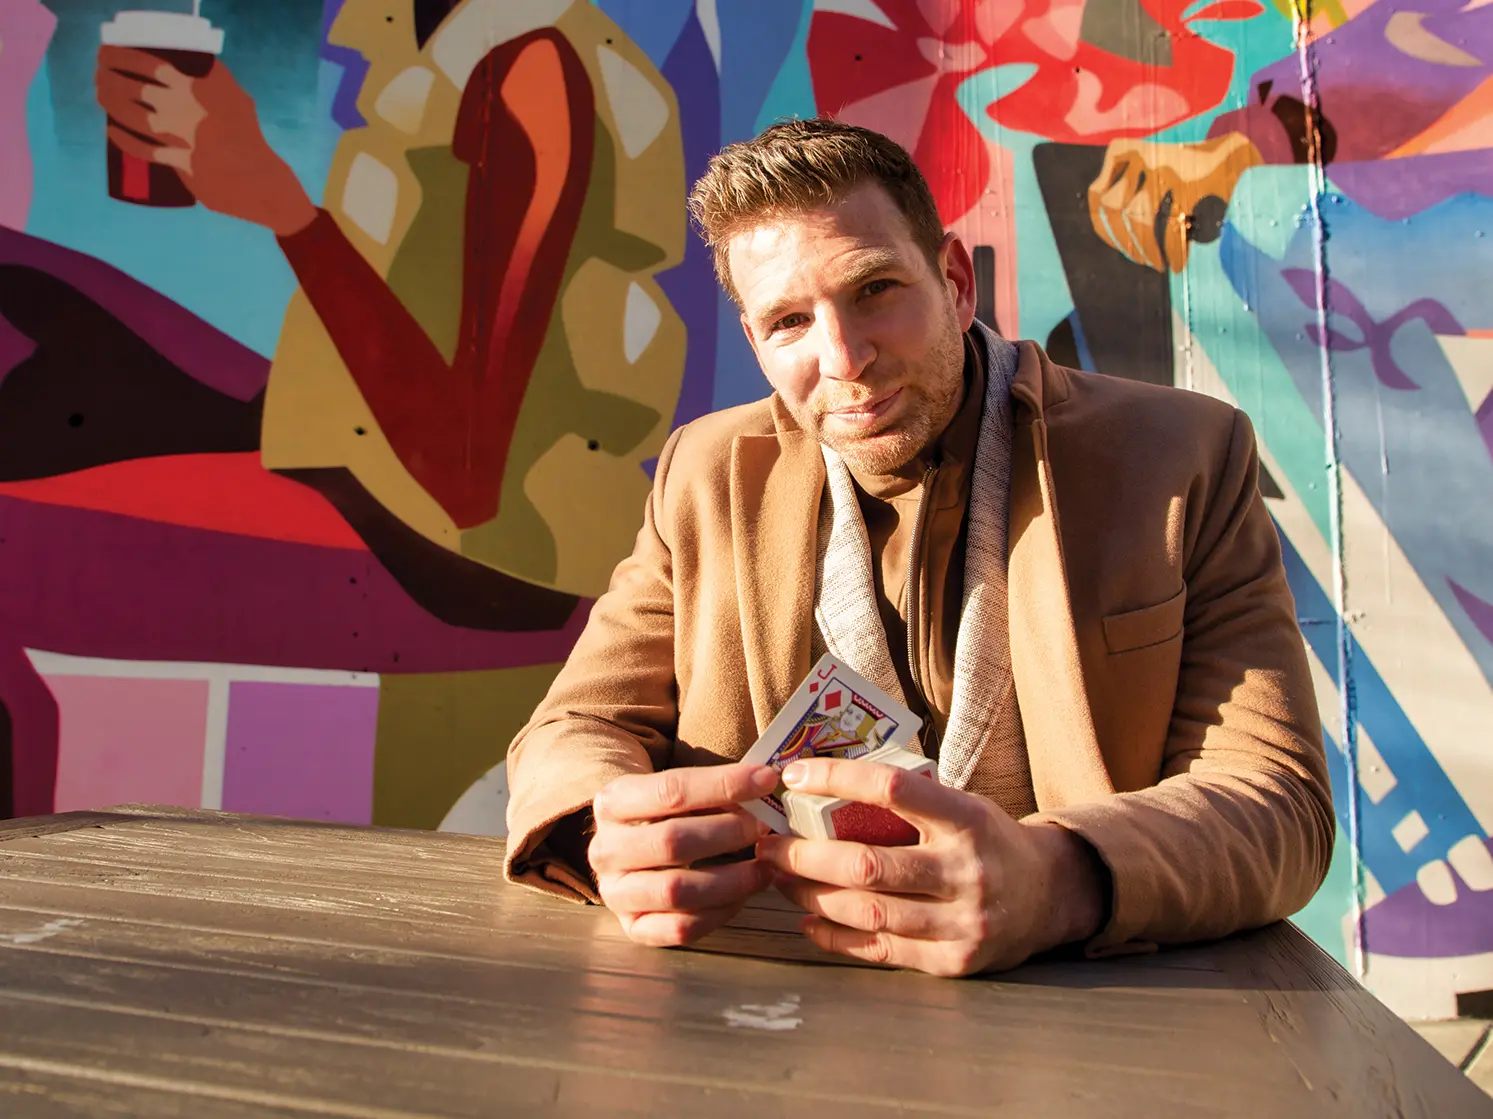 Smiling with his eyes, Joshua Jay holds a jack of diamonds while sitting at an outside mural